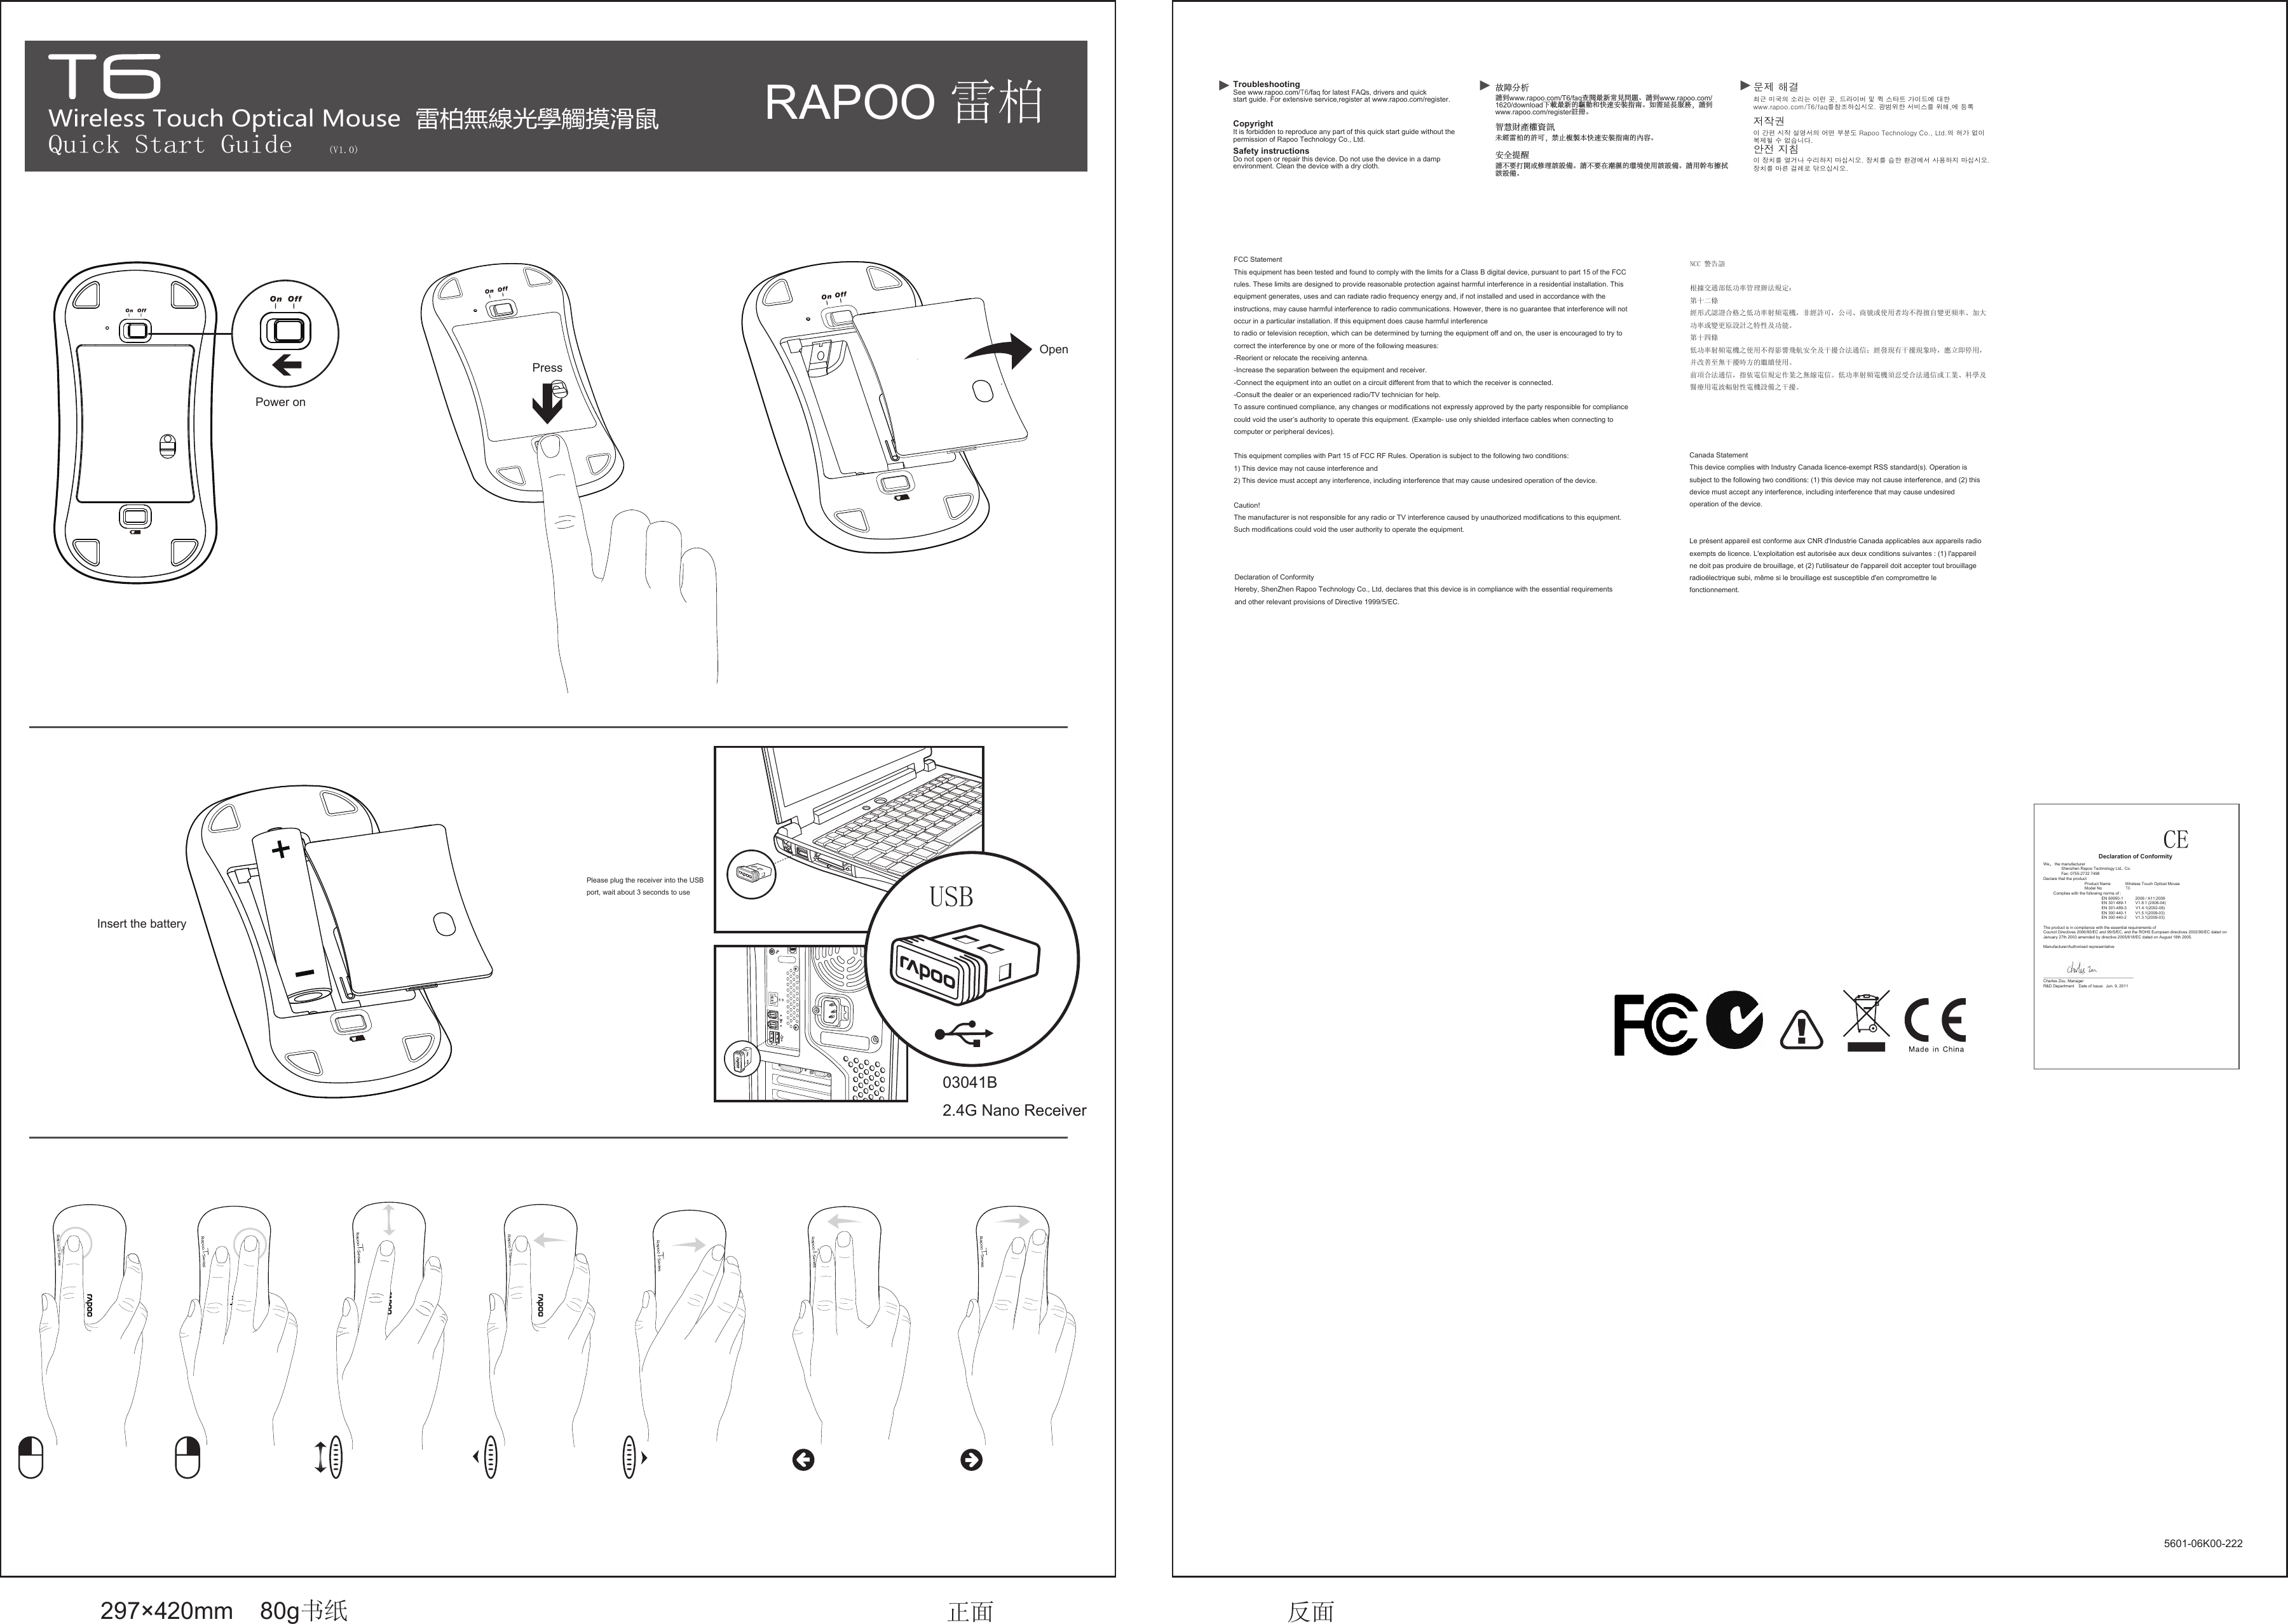 Wireless Touch Optical Mouse  雷柏無線光學觸摸滑鼠Quick Start Guide(V1.0)                 See www.rapoo.com/T6/faq for latest FAQs, drivers and quick start guide. For extensive service,register at www.rapoo.com/register. TroubleshootingDo not open or repair this device. Do not use the device in a damp environment. Clean the device with a dry cloth. Safety instructionsCopyright It is forbidden to reproduce any part of this quick start guide without the permission of Rapoo Technology Co., Ltd.          CE                                 Declaration of ConformityWe， the manufacturer                 Shenzhen Rapoo Technology Ltd., Co.                Fax: 0755-2732 7498Declare that the product                                      Product Name             Wireless Touch Optical Mouse                                     Model No                     T6         Complies with the following norms of :                                                    EN 60950-1           2006 / A11:2009                                                    EN 301 489-1        V1.8.1 (2008-04)                                                    EN 301-489-3        V1.4.1(2002-08)                                                    EN 300 440-1        V1.5.1(2009-03)                                                    EN 300 440-2        V1.3.1(2009-03)The product is in compliance with the essential requirements of Council Directives 2006/95/EC and 99/5/EC, and the ROHS European directives 2002/95/EC dated on January 27th 2003 amended by directive 2005/618/EC dated on August 18th 2005.Manufacturer/Authorised representative________________________________________Charles Zou, ManagerR&amp;D Department    Date of Issue:  Jun. 9, 2011USB              297×420mm    80g书纸 正面 反面     5601-06K00-222請到www.rapoo.com/T6/faq查閱最新常見問題、請到www.rapoo.com/1620/download下載最新的驅動和快速安裝指南。如需延長服務，請到www.rapoo.com/register註冊。故障分析請不要打開或修理該設備。請不要在潮濕的環境使用該設備。請用幹布擦拭該設備。安全提醒智慧財產權資訊未經雷柏的許可，禁止複製本快速安裝指南的內容。안전 지침이 장치를 열거나 수리하지 마십시오. 장치를 습한 환경에서 사용하지 마십시오.장치를 마른 걸레로 닦으십시오.저작권 이 간편 시작 설명서의 어떤 부분도 Rapoo Technology Co., Ltd.의 허가 없이 복제될 수 없습니다.최근 미국의 소리는 이런 곳, 드라이버 및 퀵 스타트 가이드에 대한www.rapoo.com/T6/faq를참조하십시오. 광범위한 서비스를 위해,에 등록  문제 해결FCC StatementThis equipment has been tested and found to comply with the limits for a Class B digital device, pursuant to part 15 of the FCC rules. These limits are designed to provide reasonable protection against harmful interference in a residential installation. This equipment generates, uses and can radiate radio frequency energy and, if not installed and used in accordance with the instructions, may cause harmful interference to radio communications. However, there is no guarantee that interference will not occur in a particular installation. If this equipment does cause harmful interference to radio or television reception, which can be determined by turning the equipment off and on, the user is encouraged to try to correct the interference by one or more of the following measures:-Reorient or relocate the receiving antenna.-Increase the separation between the equipment and receiver.-Connect the equipment into an outlet on a circuit different from that to which the receiver is connected.-Consult the dealer or an experienced radio/TV technician for help.To assure continued compliance, any changes or modifications not expressly approved by the party responsible for compliance could void the user’s authority to operate this equipment. (Example- use only shielded interface cables when connecting to computer or peripheral devices).This equipment complies with Part 15 of FCC RF Rules. Operation is subject to the following two conditions:1) This device may not cause interference and2) This device must accept any interference, including interference that may cause undesired operation of the device.Caution! The manufacturer is not responsible for any radio or TV interference caused by unauthorized modifications to this equipment. Such modifications could void the user authority to operate the equipment. NCC 警告語根據交通部低功率管理辦法規定：第十二條經形式認證合格之低功率射頻電機，非經許可，公司、商號或使用者均不得擅自變更頻率、加大功率或變更原設計之特性及功能。第十四條低功率射頻電機之使用不得影響飛航安全及干擾合法通信；經發現有干擾現象時，應立即停用，并改善至無干擾時方的繼續使用。前項合法通信，指依電信規定作業之無線電信。低功率射頻電機須忍受合法通信或工業、科學及醫療用電波輻射性電機設備之干擾。Canada Statement  This device complies with Industry Canada licence-exempt RSS standard(s). Operation is subject to the following two conditions: (1) this device may not cause interference, and (2) this device must accept any interference, including interference that may cause undesired operation of the device. Le présent appareil est conforme aux CNR d&apos;Industrie Canada applicables aux appareils radio exempts de licence. L&apos;exploitation est autorisée aux deux conditions suivantes : (1) l&apos;appareil ne doit pas produire de brouillage, et (2) l&apos;utilisateur de l&apos;appareil doit accepter tout brouillage radioélectrique subi, même si le brouillage est susceptible d&apos;en compromettre le fonctionnement.Declaration of ConformityHereby, ShenZhen Rapoo Technology Co., Ltd, declares that this device is in compliance with the essential requirements and other relevant provisions of Directive 1999/5/EC.RAPOO 雷柏Power onPress OpenInsert the batteryPlease plug the receiver into the USB port, wait about 3 seconds to use03041B2.4G Nano Receiver